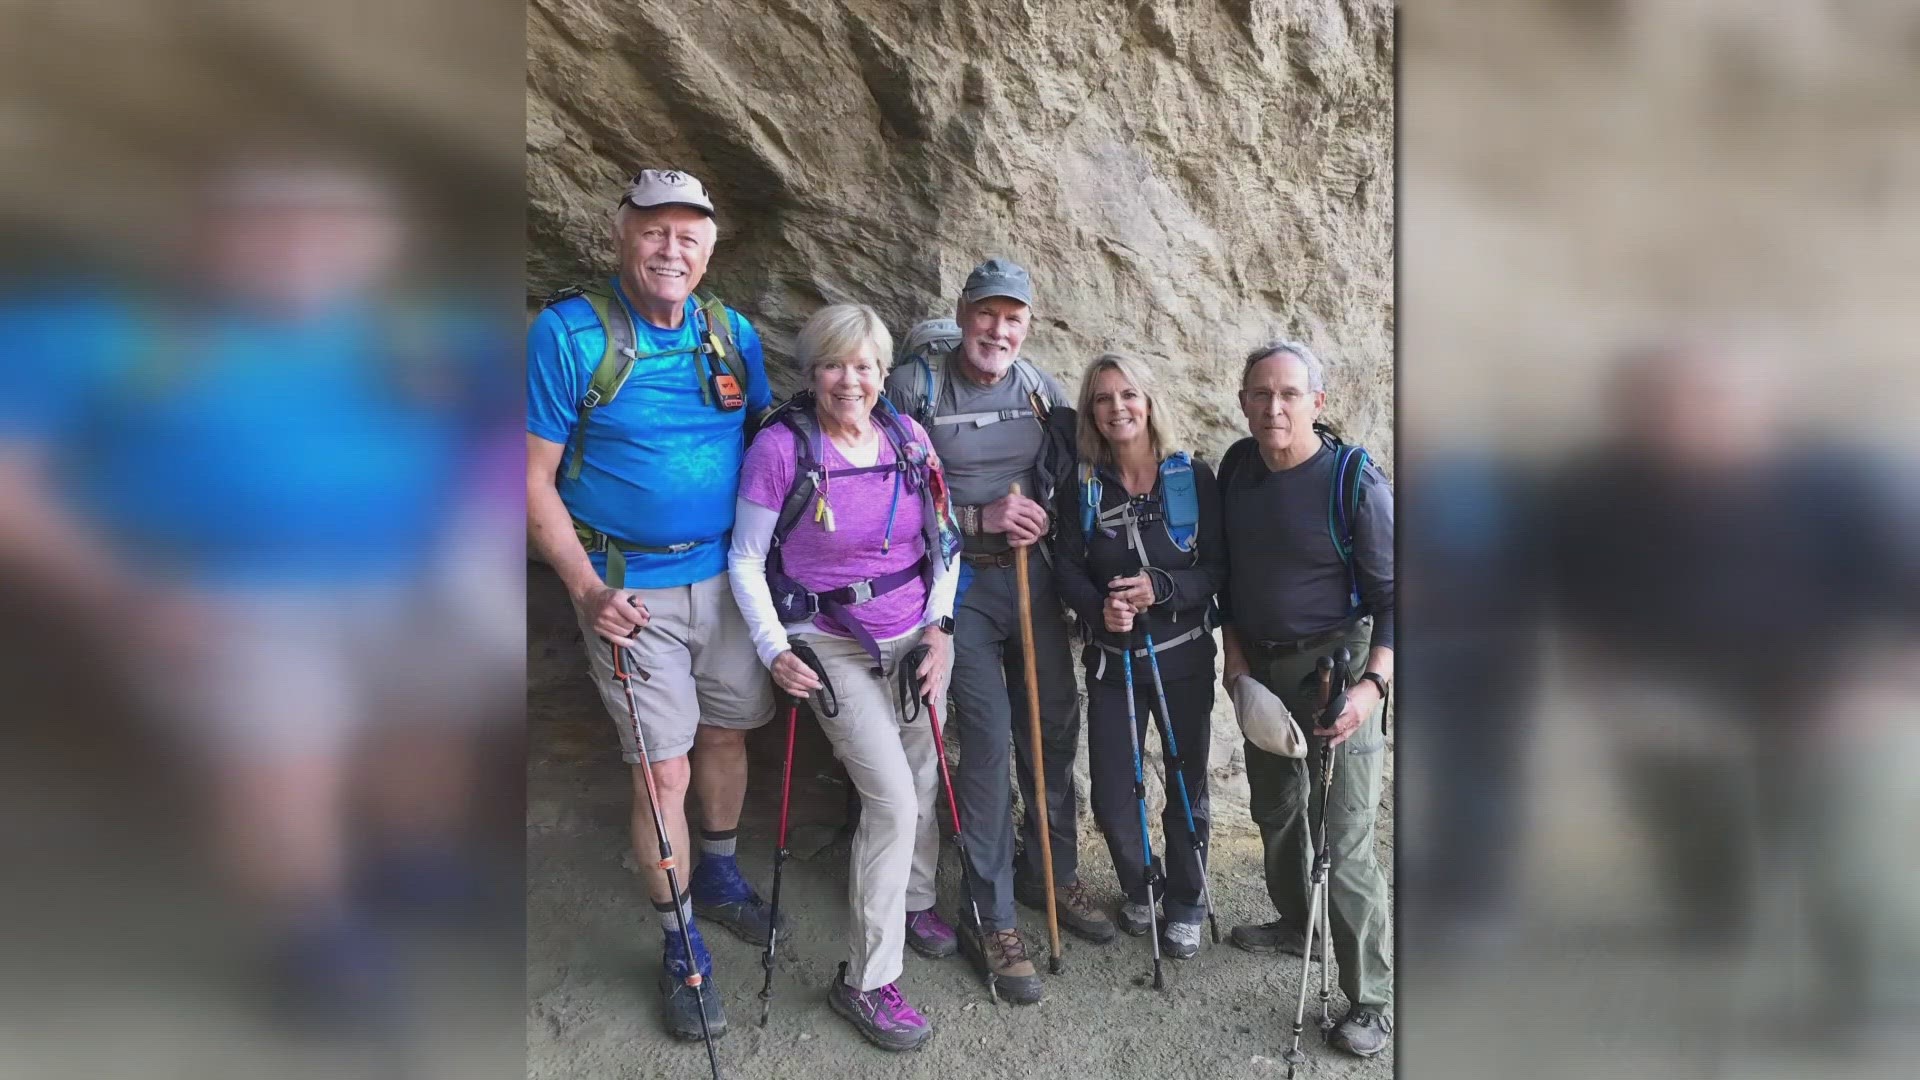 80-year-old Vietnam veteran Larry Russell set out to hike Mount LeConte 80 times, the signature peak is almost 6,600 feet. But that's an average day for him.